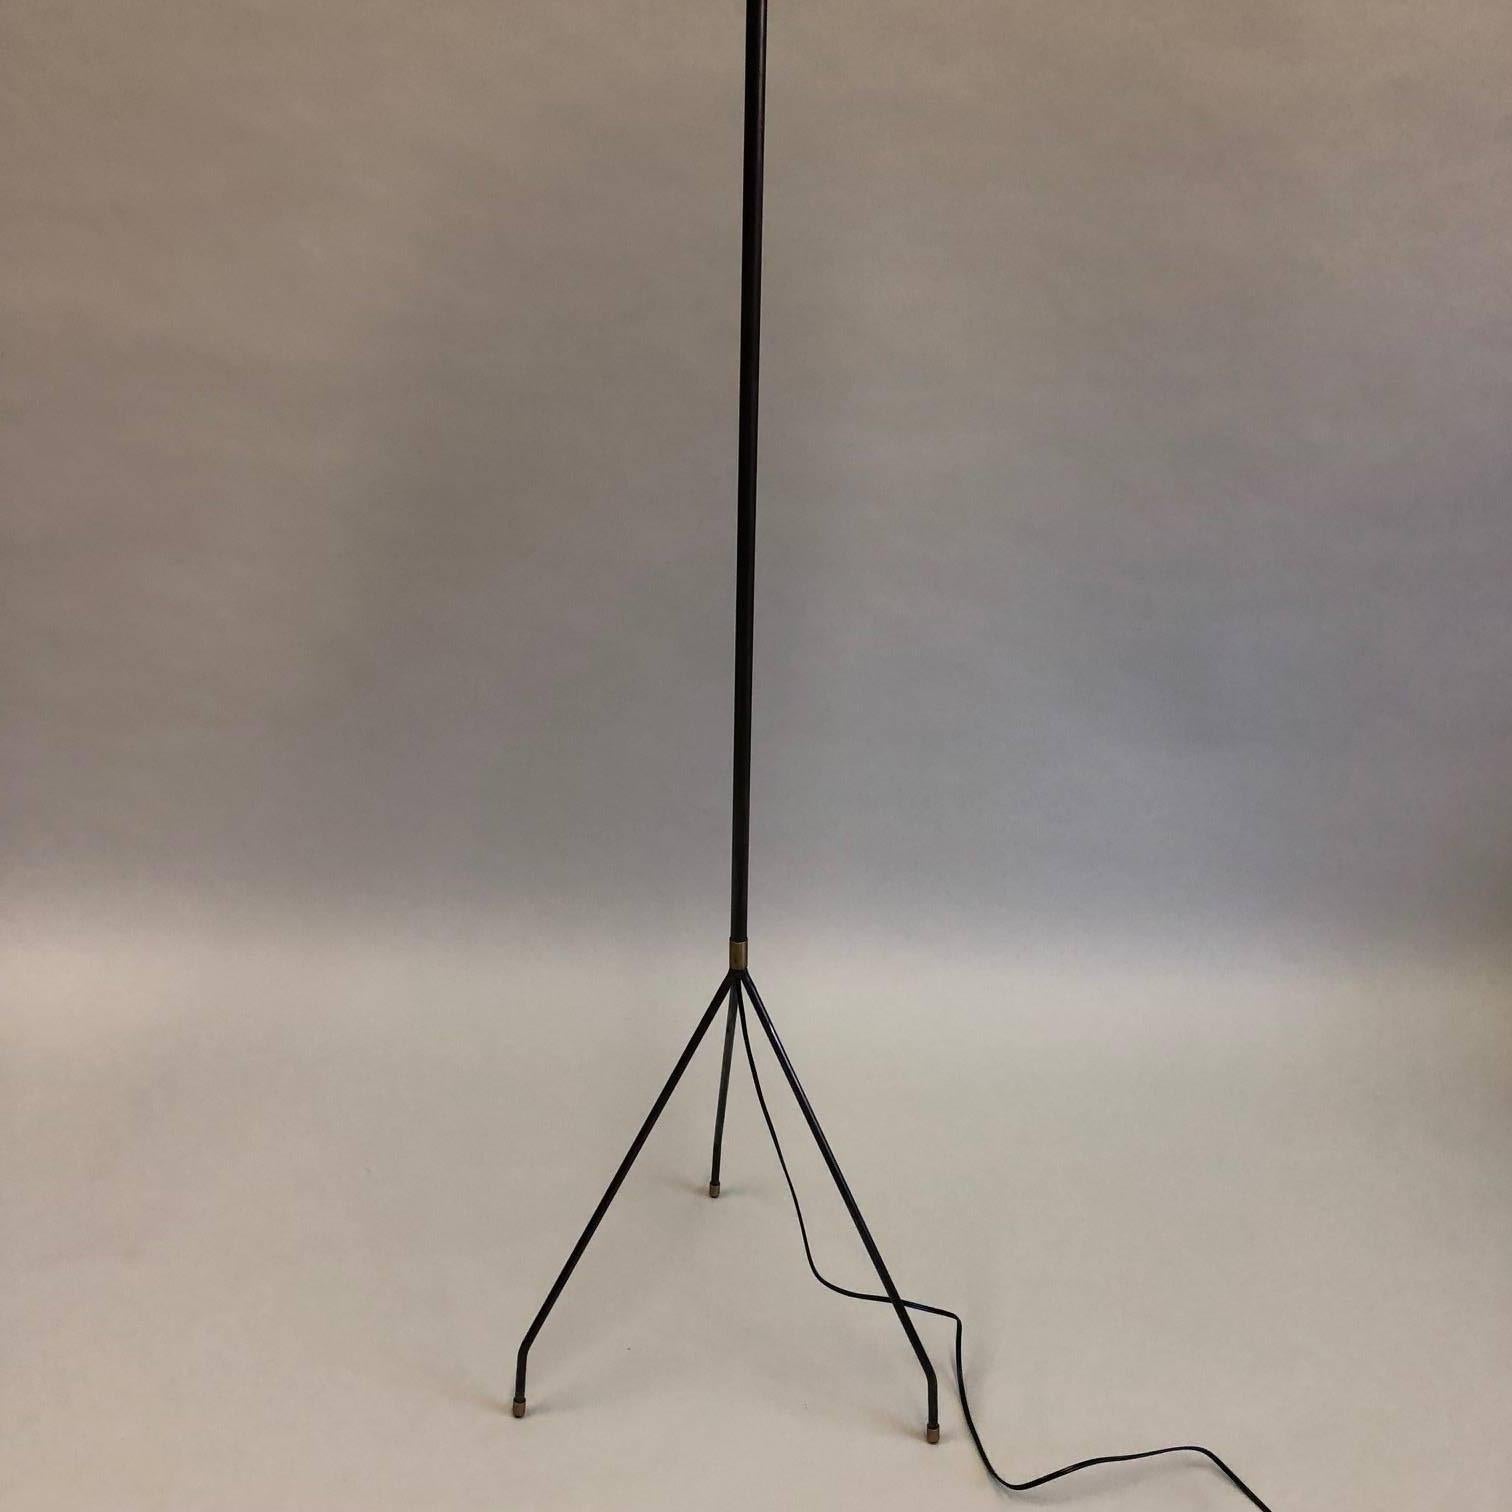 20th Century Pair of French Mid-Century Modern / Minimalist Iron Floor Lamps, Pierre Guariche For Sale